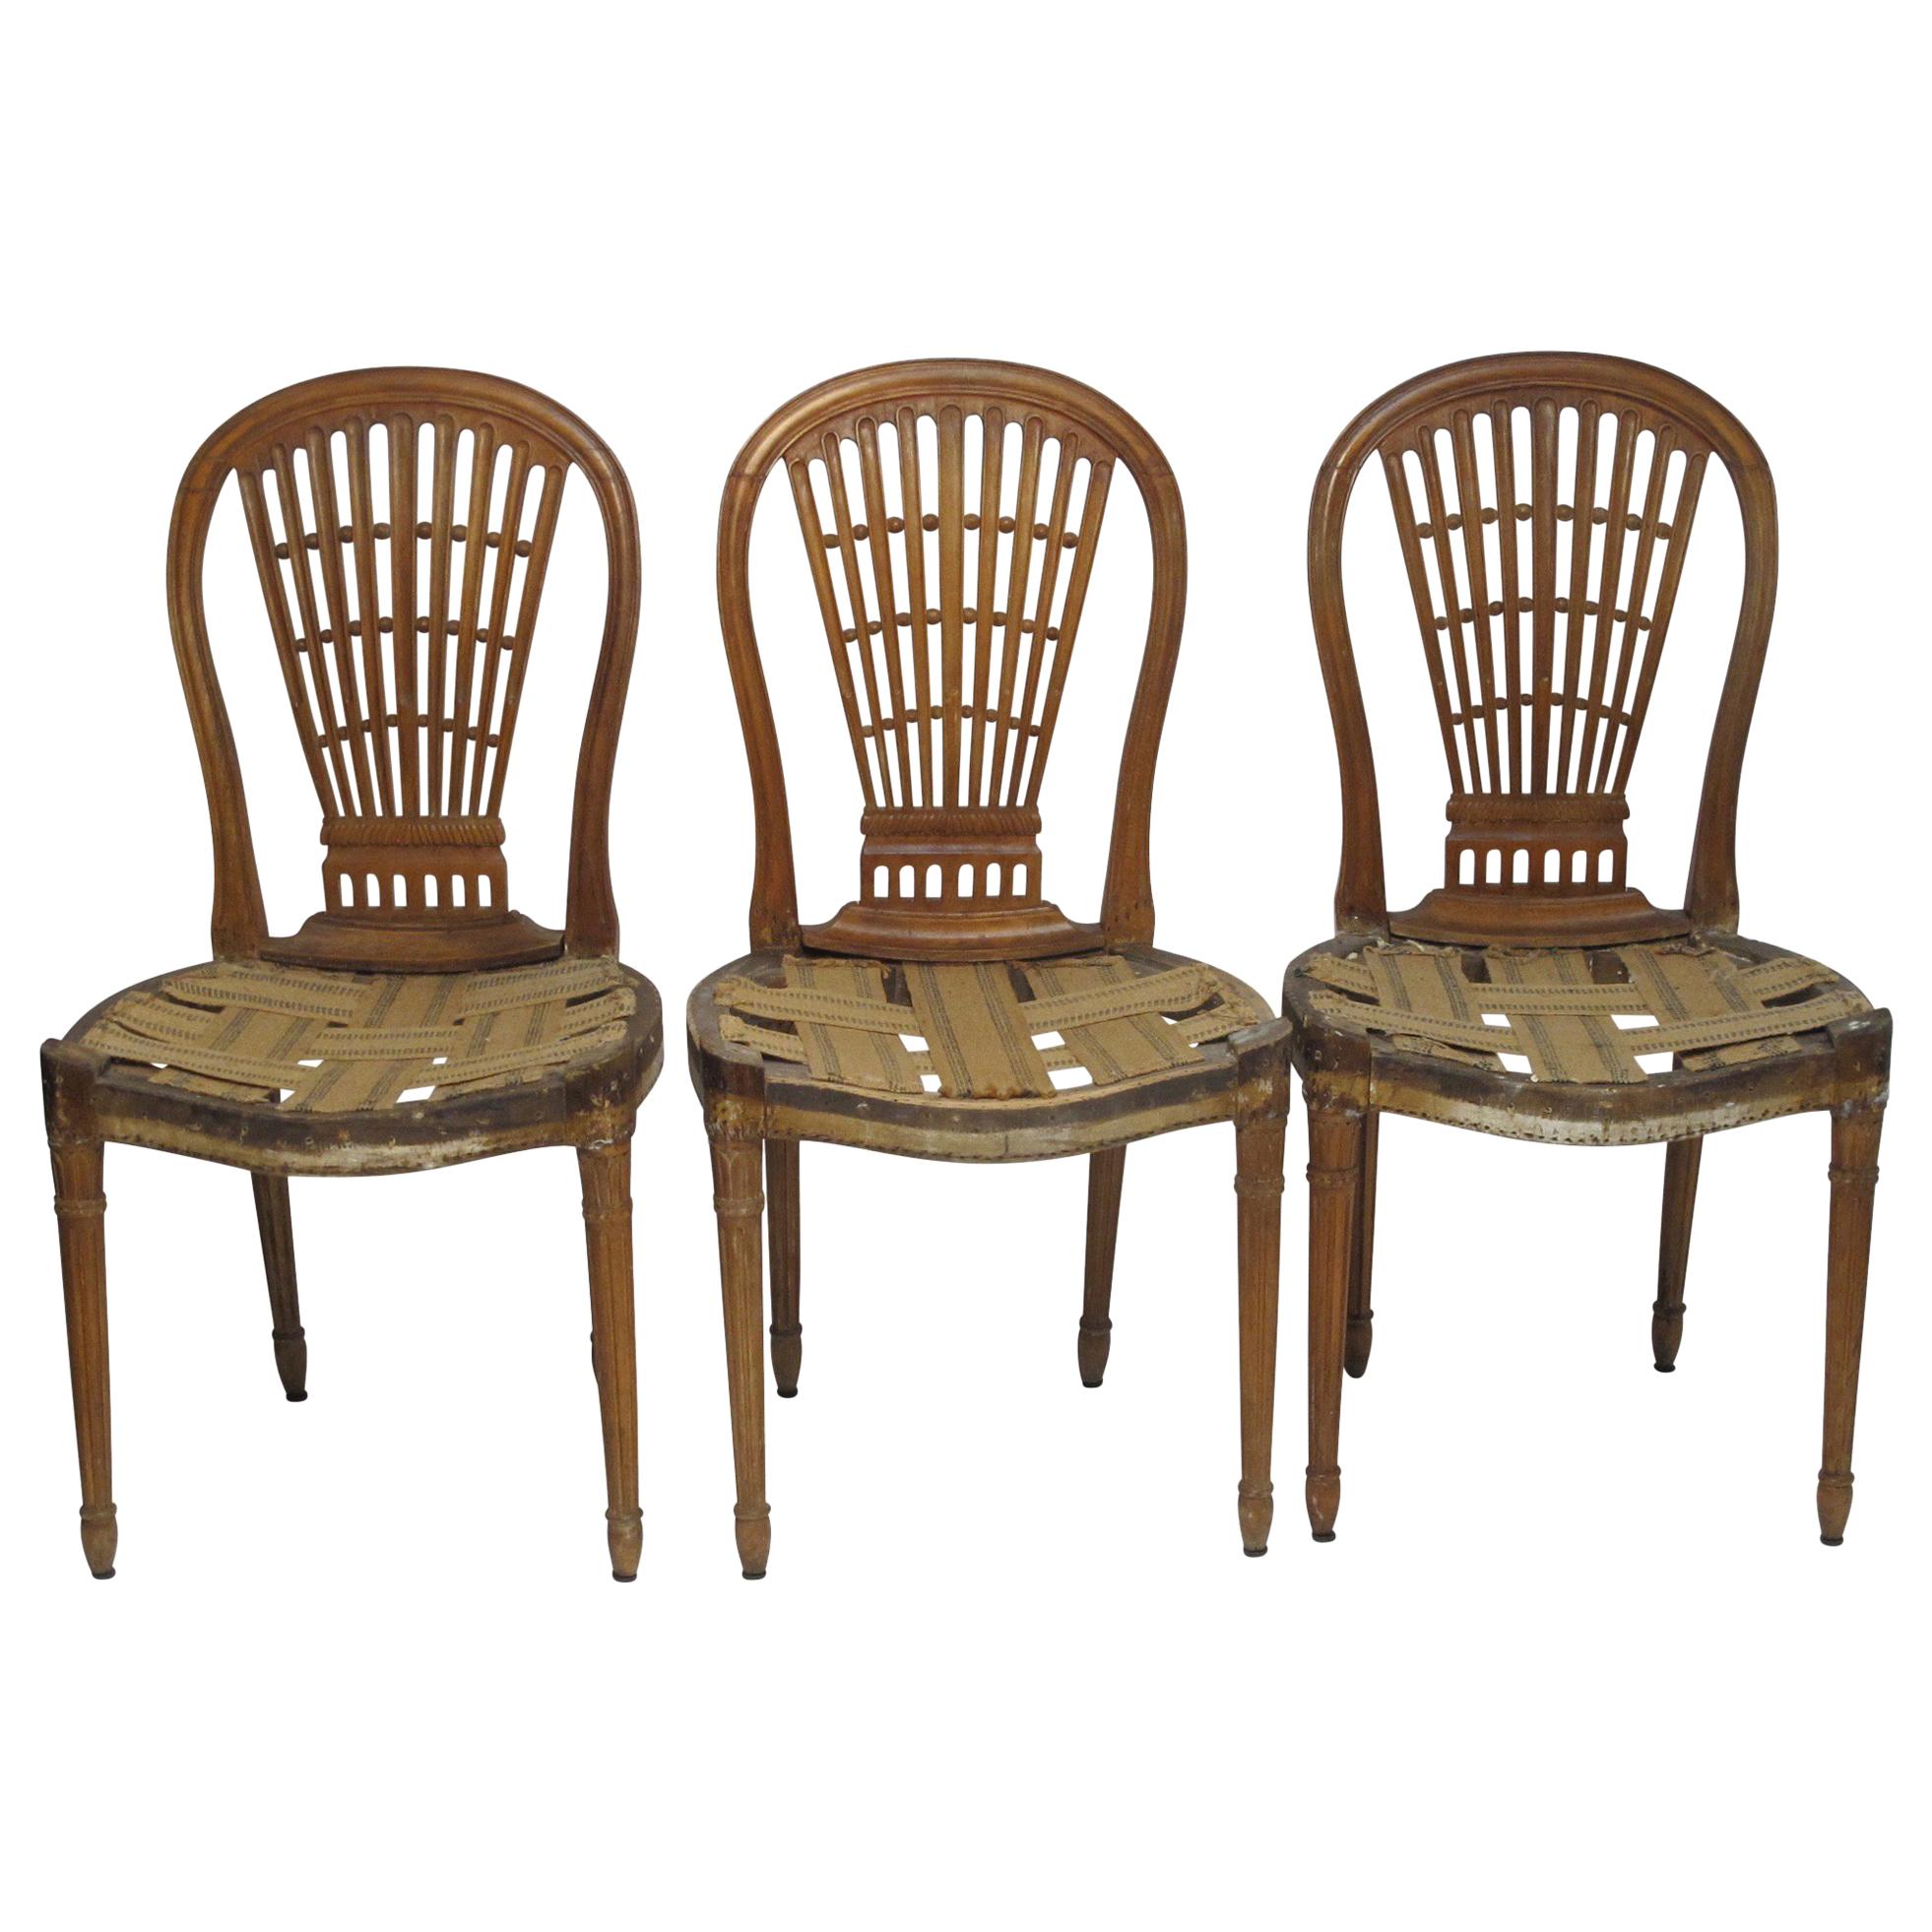 Set of Six Maison Jansen Balloon Back Dining Side Chairs, Early 20th Century